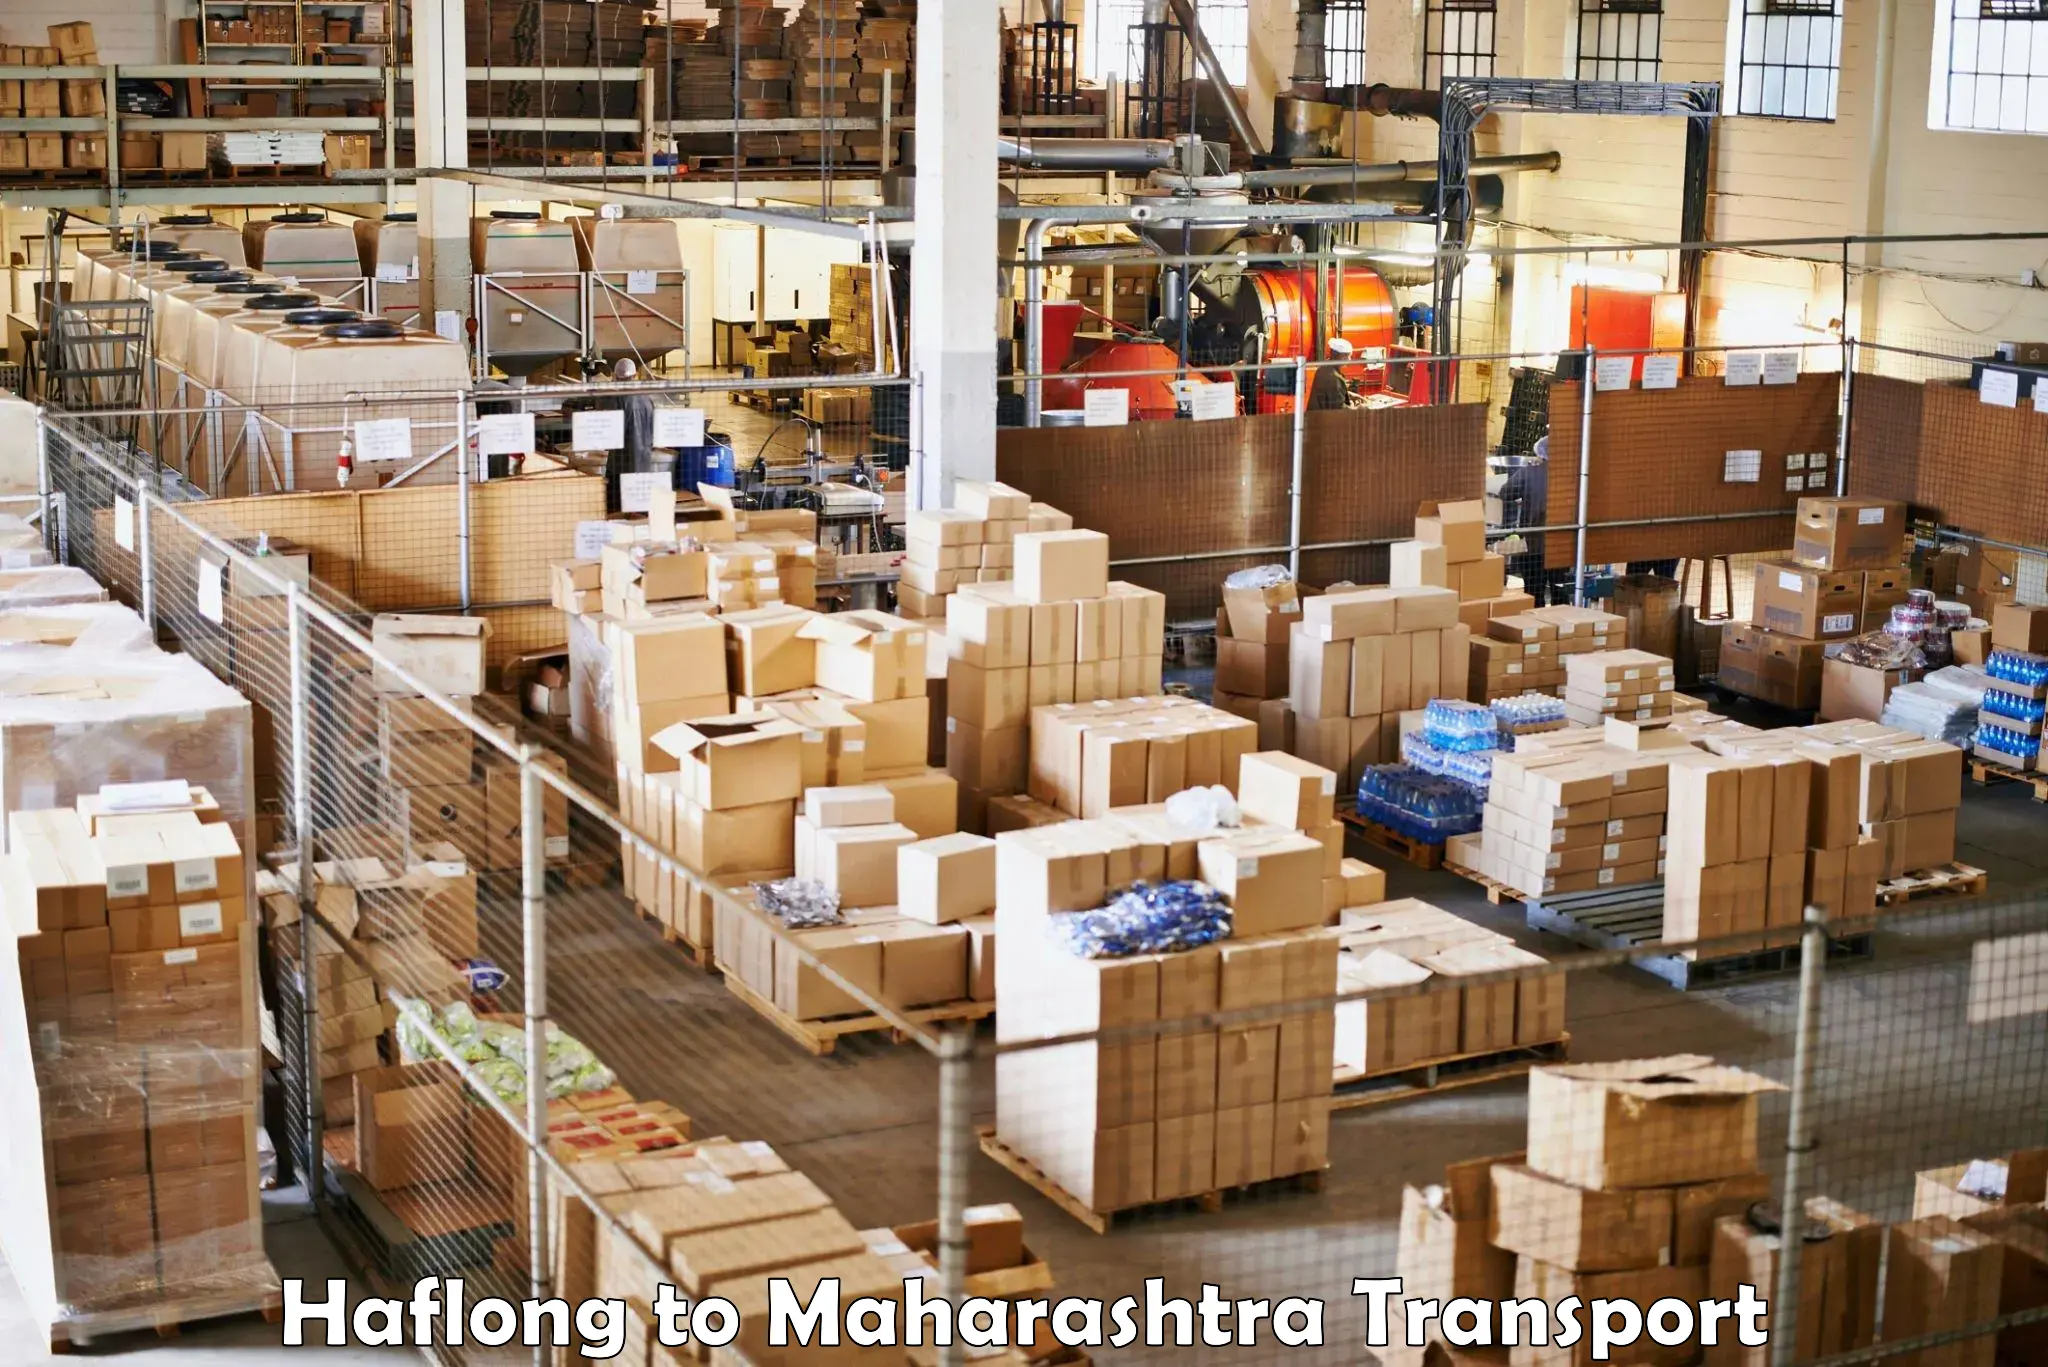 Truck transport companies in India Haflong to Omerga